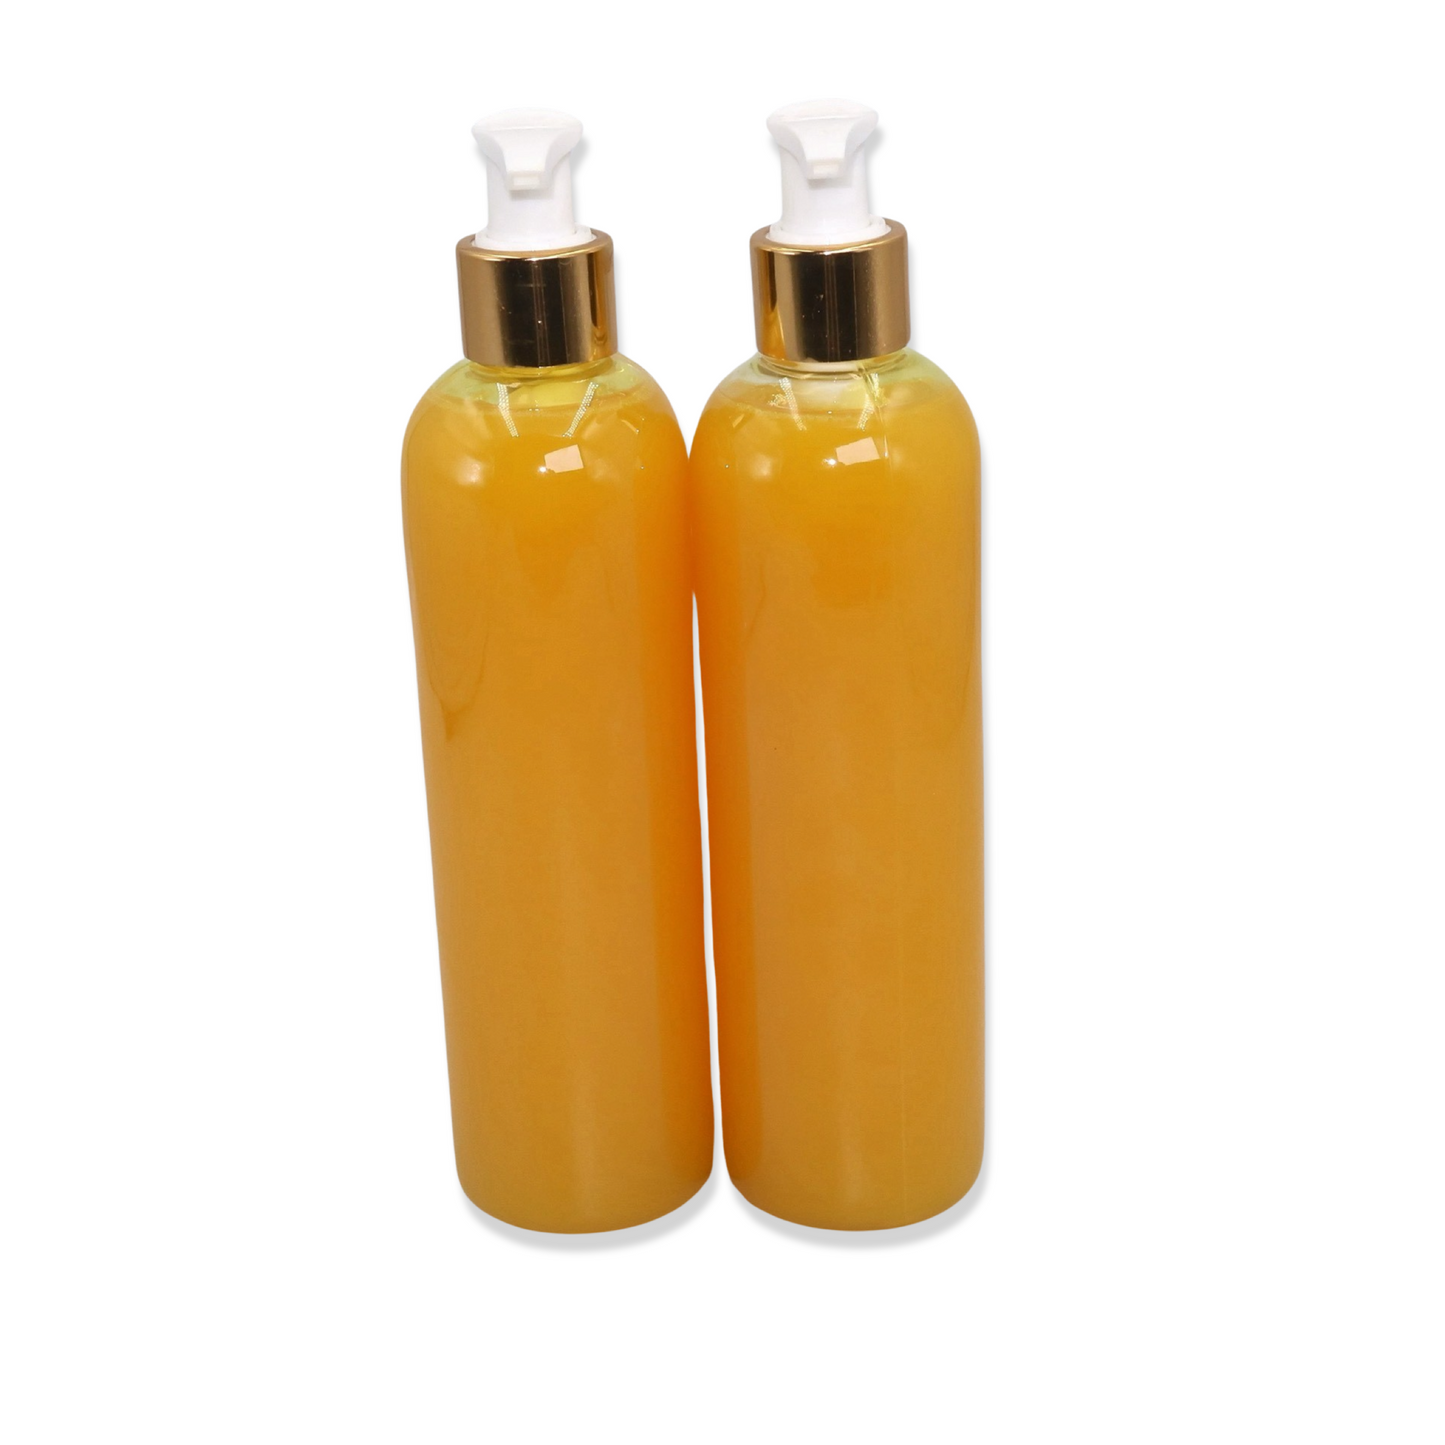 Skin lightening shower gel / body wash enriched with turmeric and kojic acid